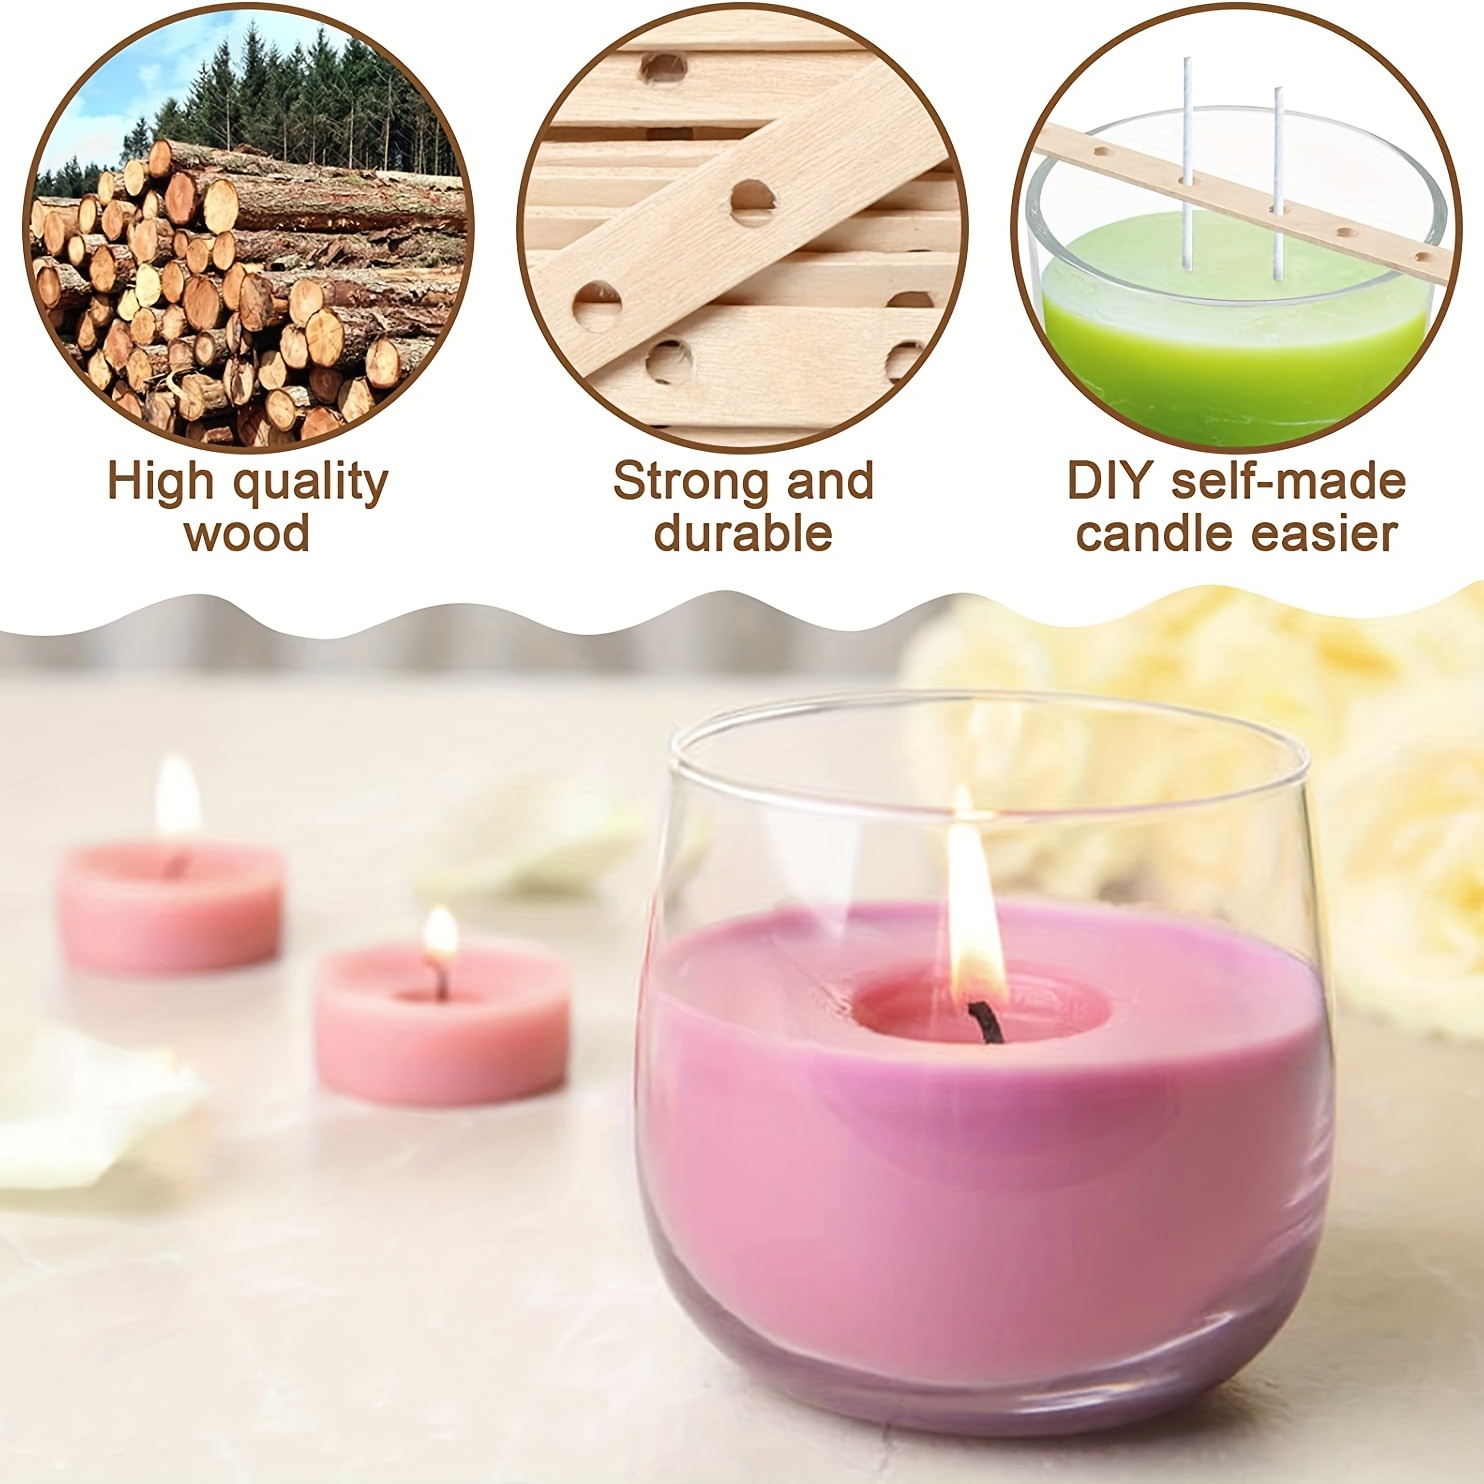 Wooden Candle Wick Holders,Candle Wicks Centering Device,Candle Wick  Bars,Wick Holders for Candle Making,Wick Clips for Candles,Candle Centering